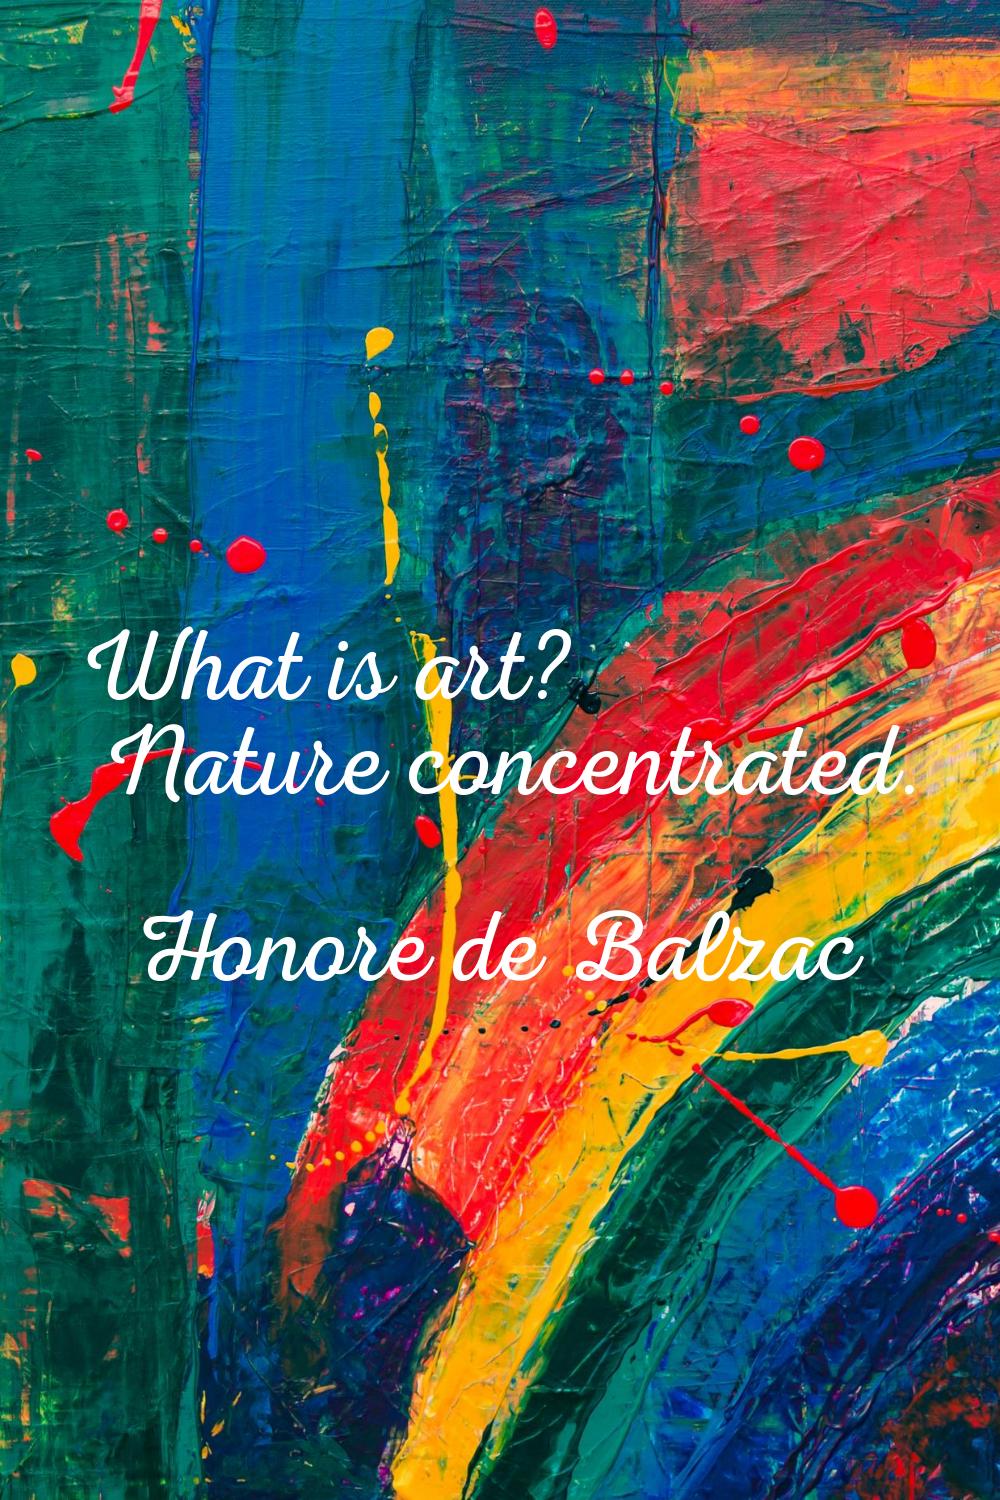 What is art? Nature concentrated.